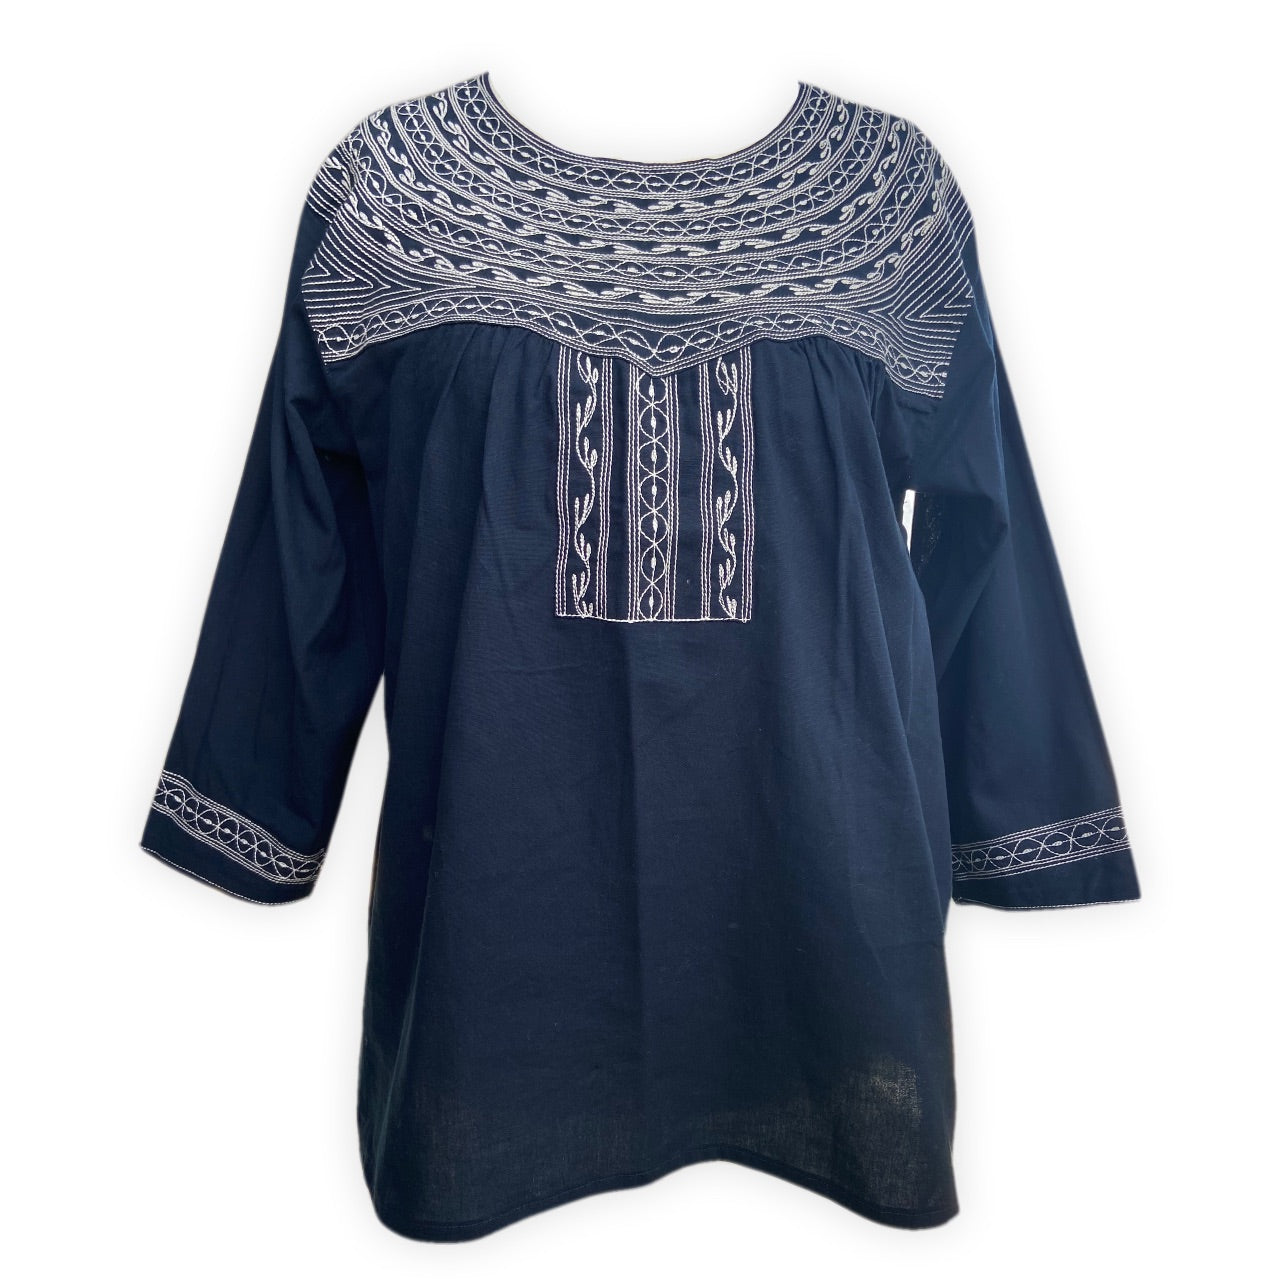 Oaxacan artisan blouse navy blue with embroidery in silver